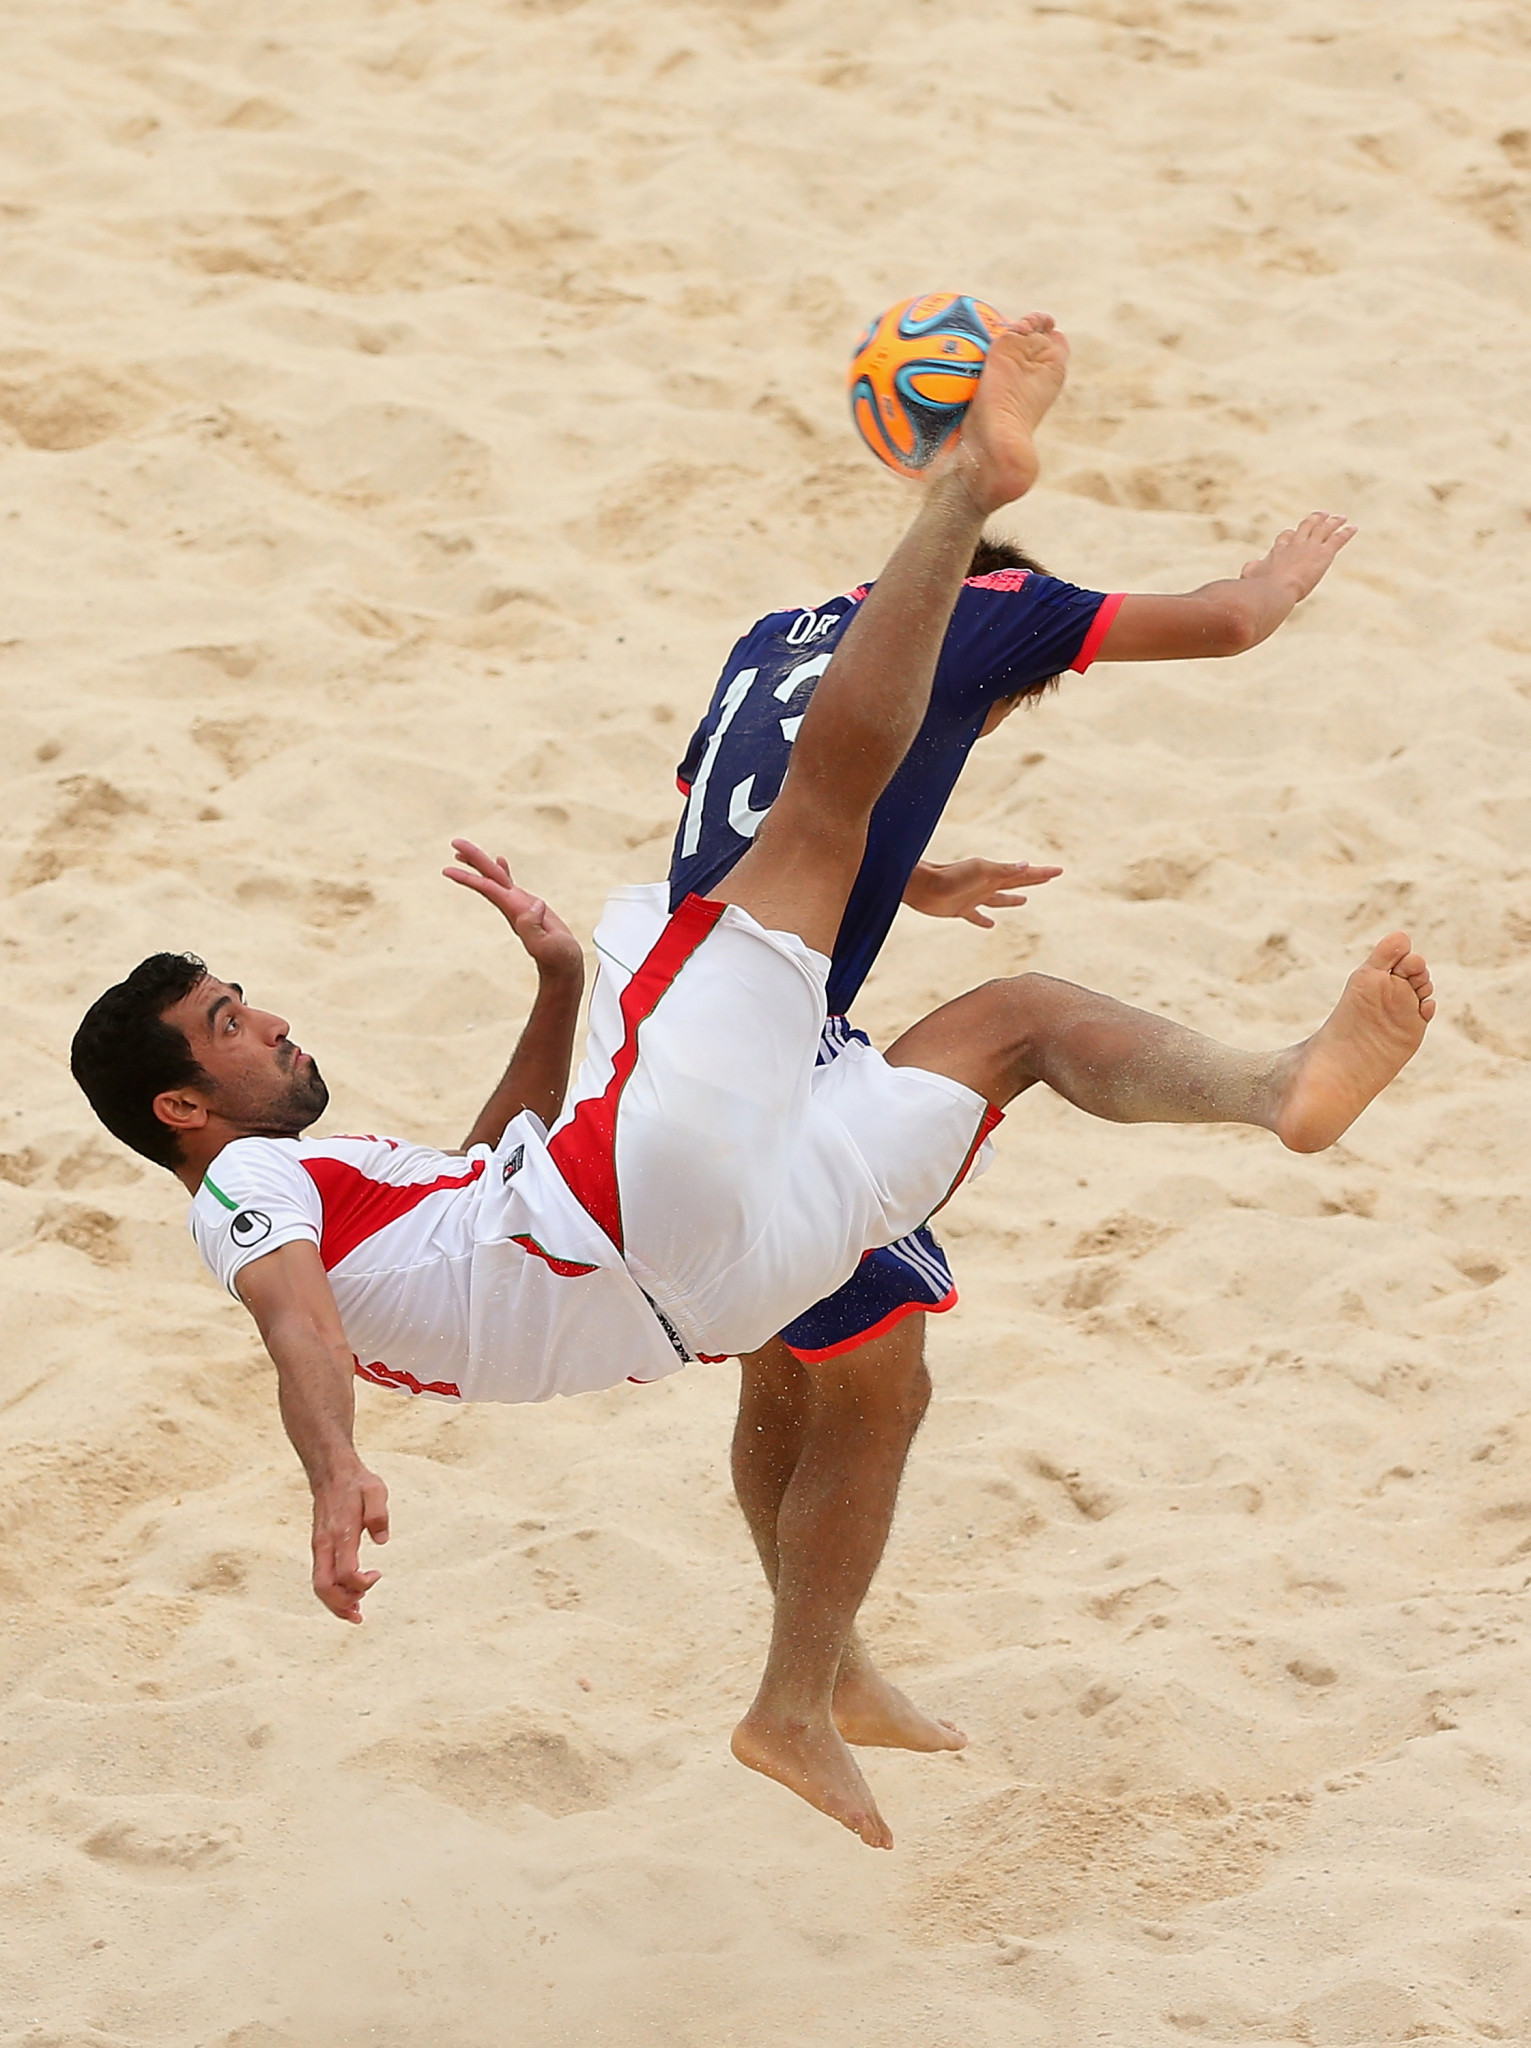 Beach soccer will be on the programme for the 2020 Asian Beach Games ©Getty Images